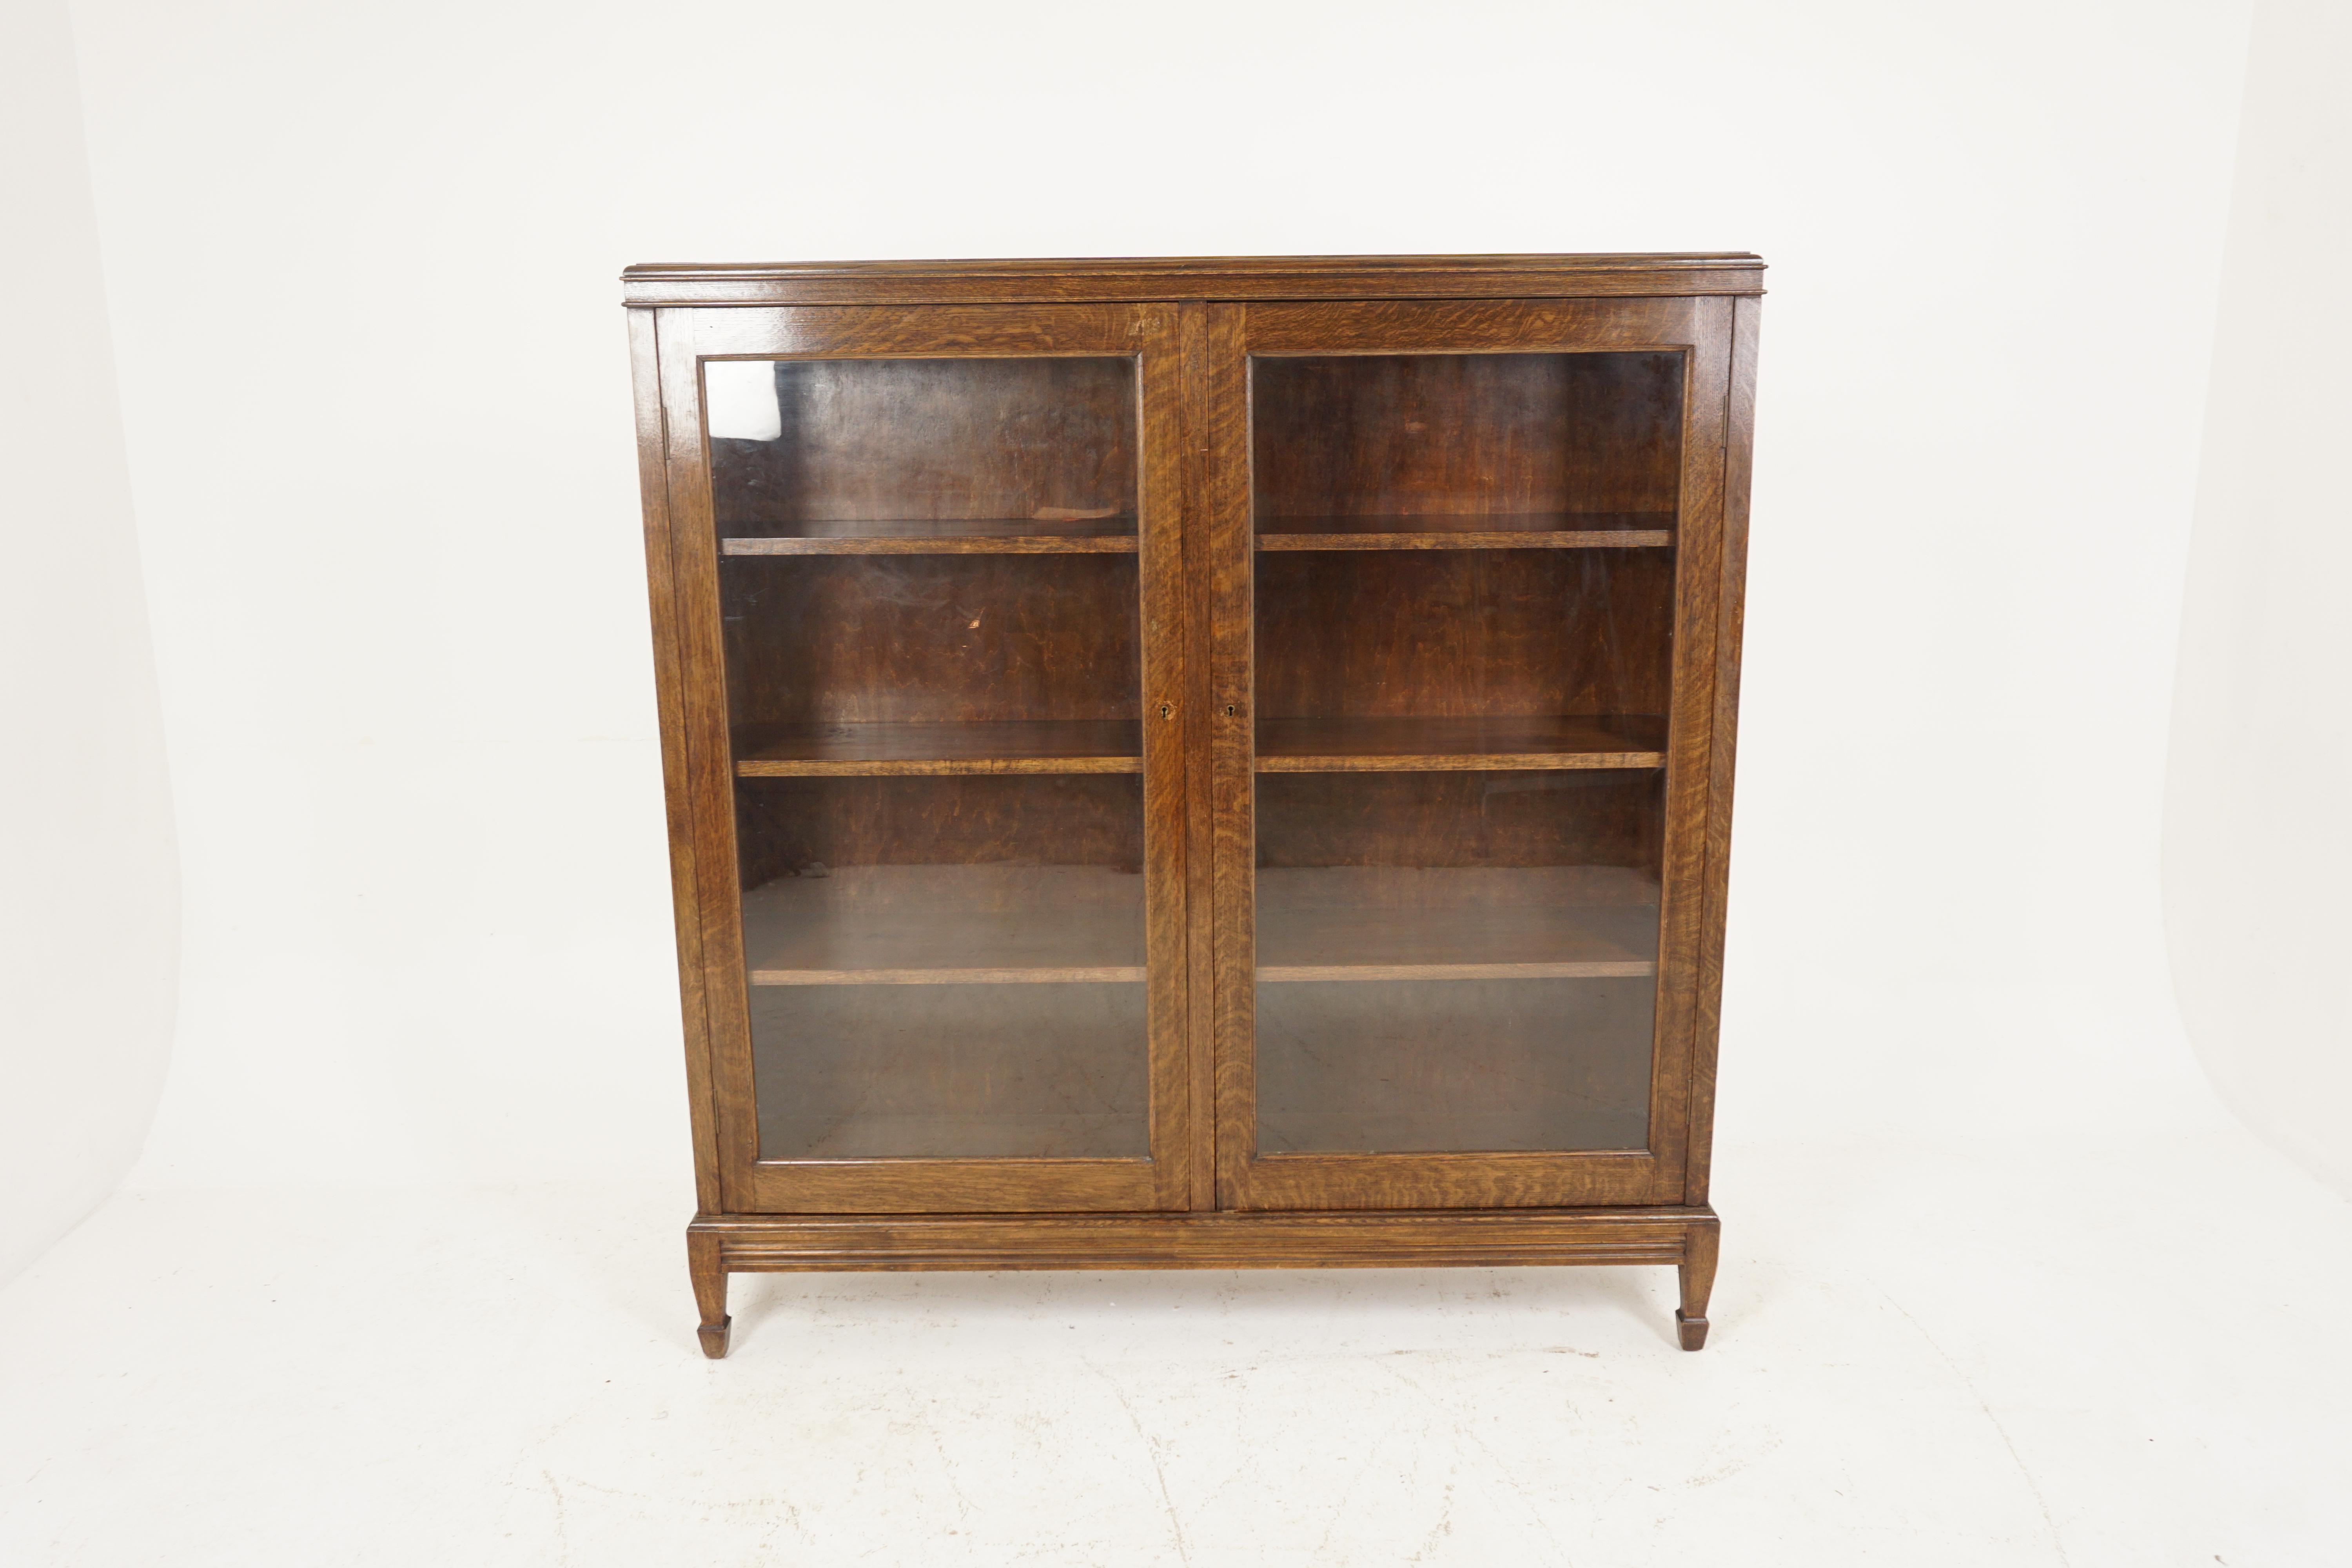 Antique oak bookcases, Arts + Crafts, display cabinet, Scotland 1910, B2616

Scotland 1910
Solid oak.
Original finish.
Rectangular top.
Pair of original glass doors.
With three shelves.
Original lock and key.
All standing on shaped tapered